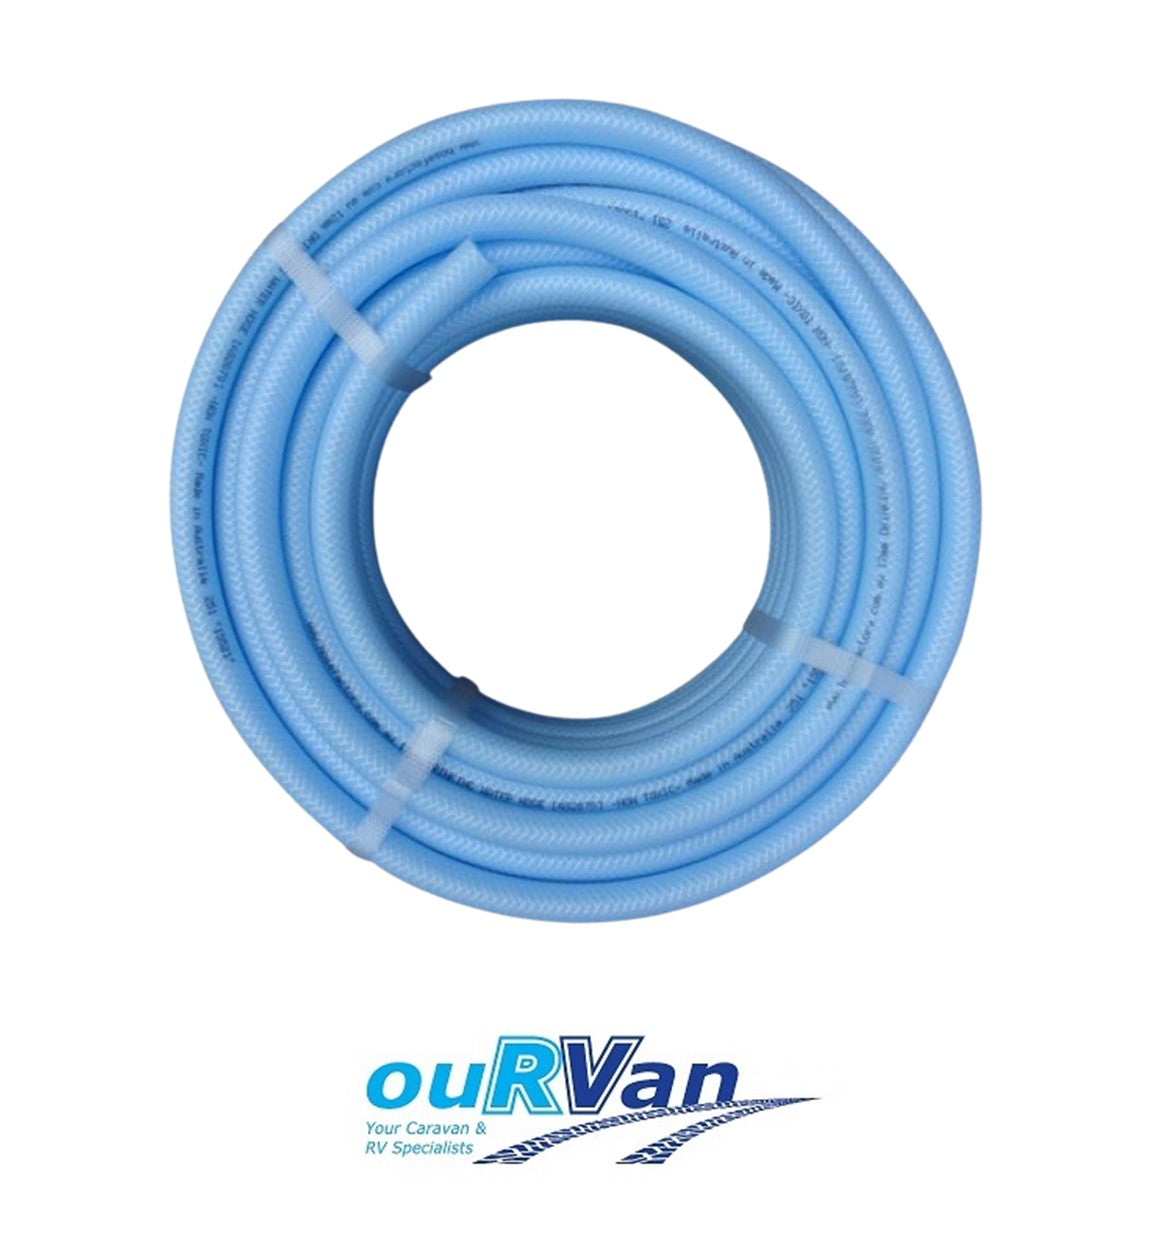 DRINKING WATER HOSE 20M X 12MM WITH FITTINGS CARAVAN